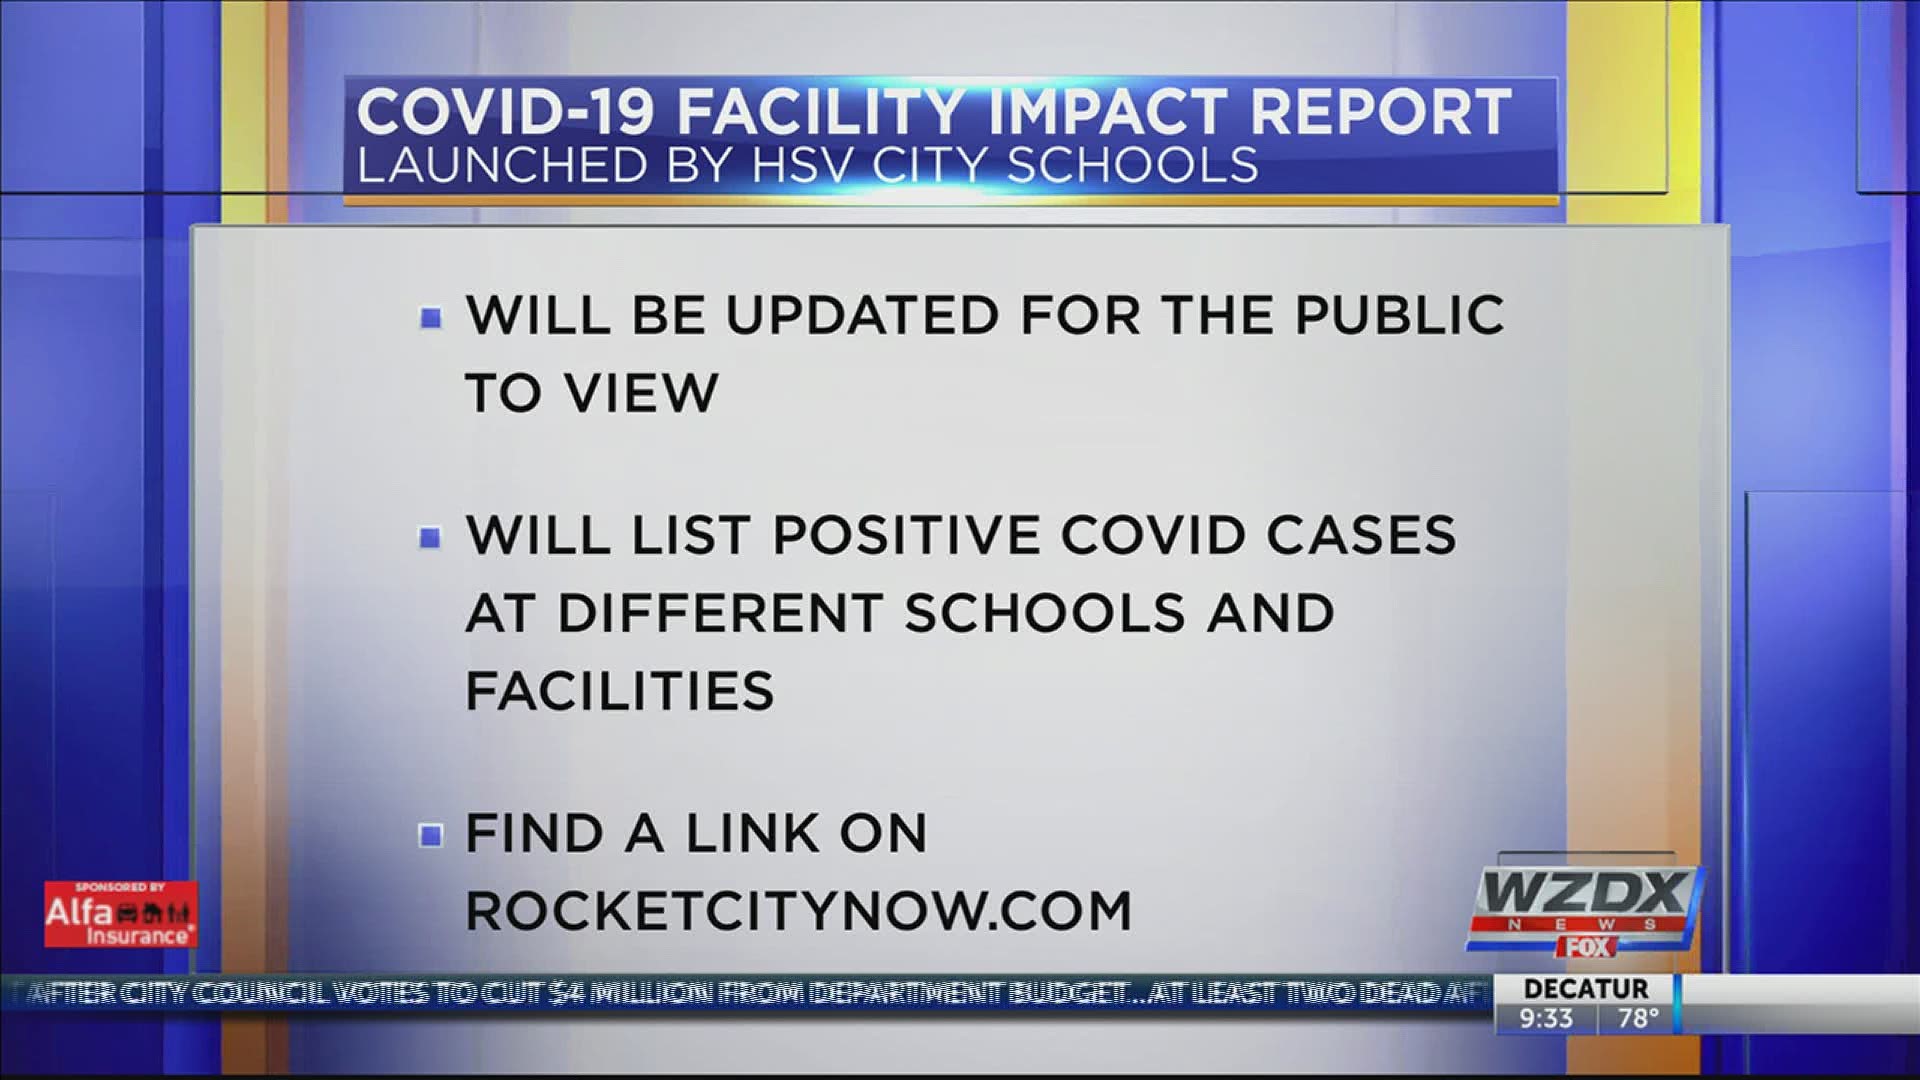 Families can go online and see how COVID-19 is impacting facilities and personnel.